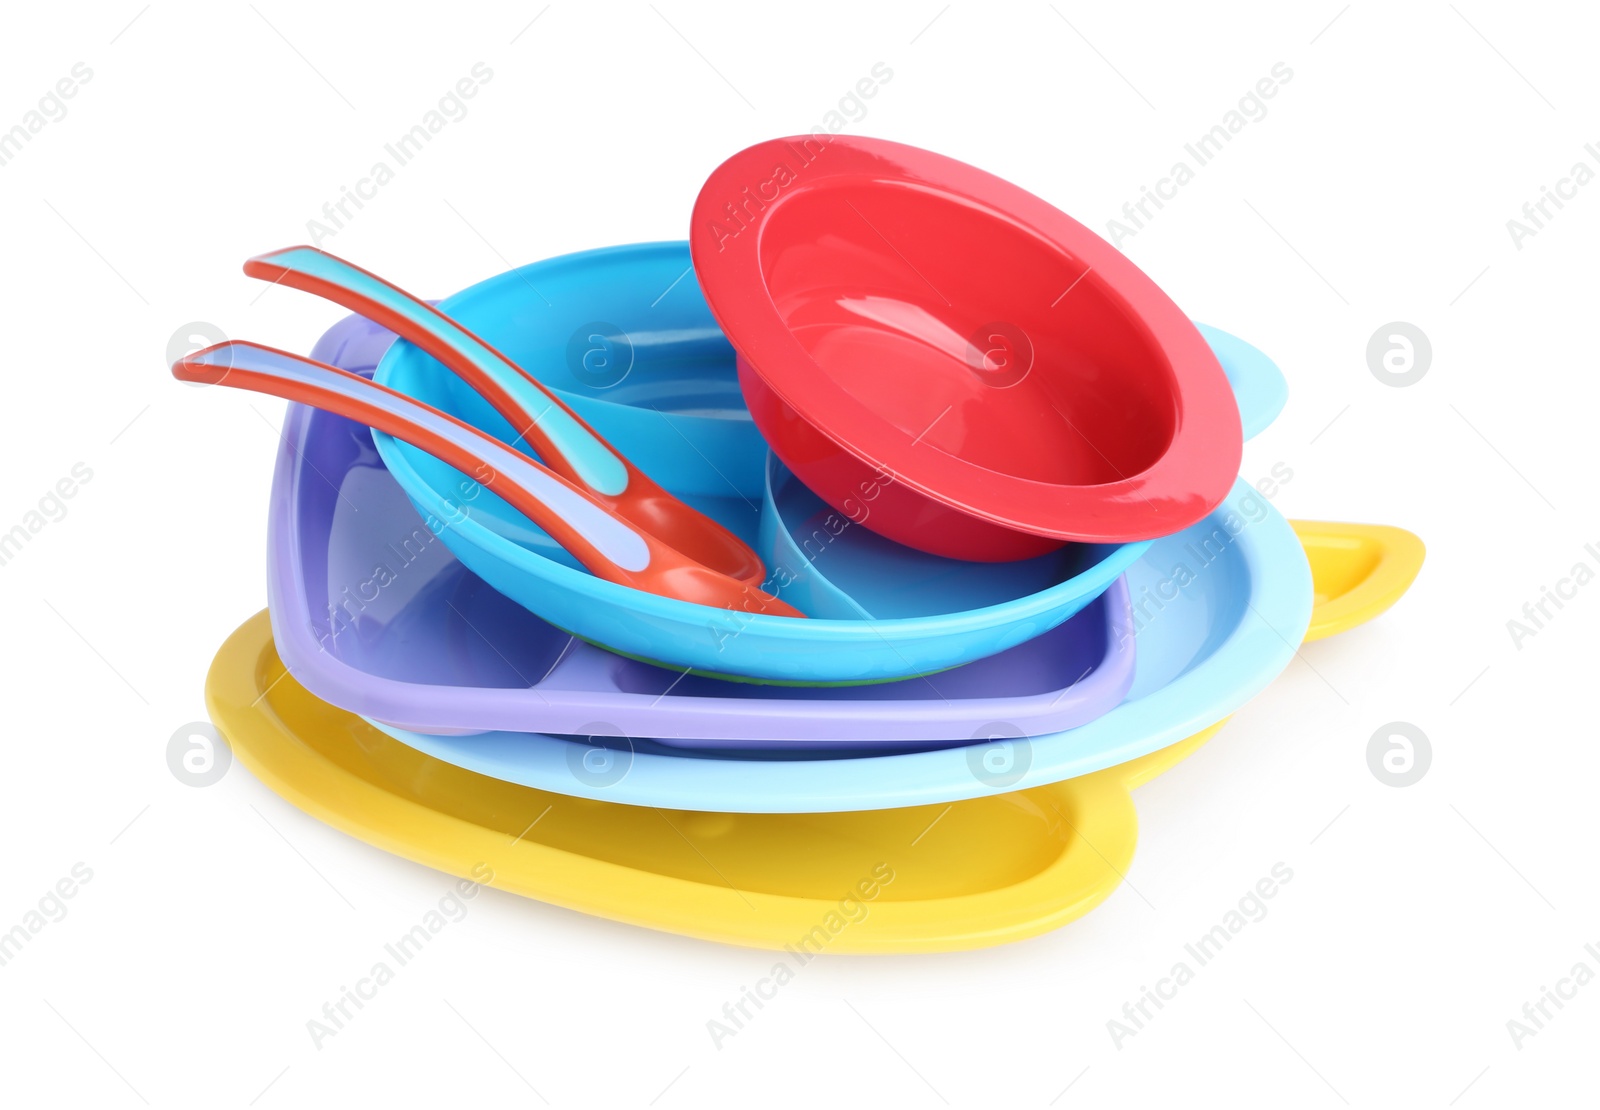 Photo of Pile of colorful plastic dishware isolated on white. Serving baby food